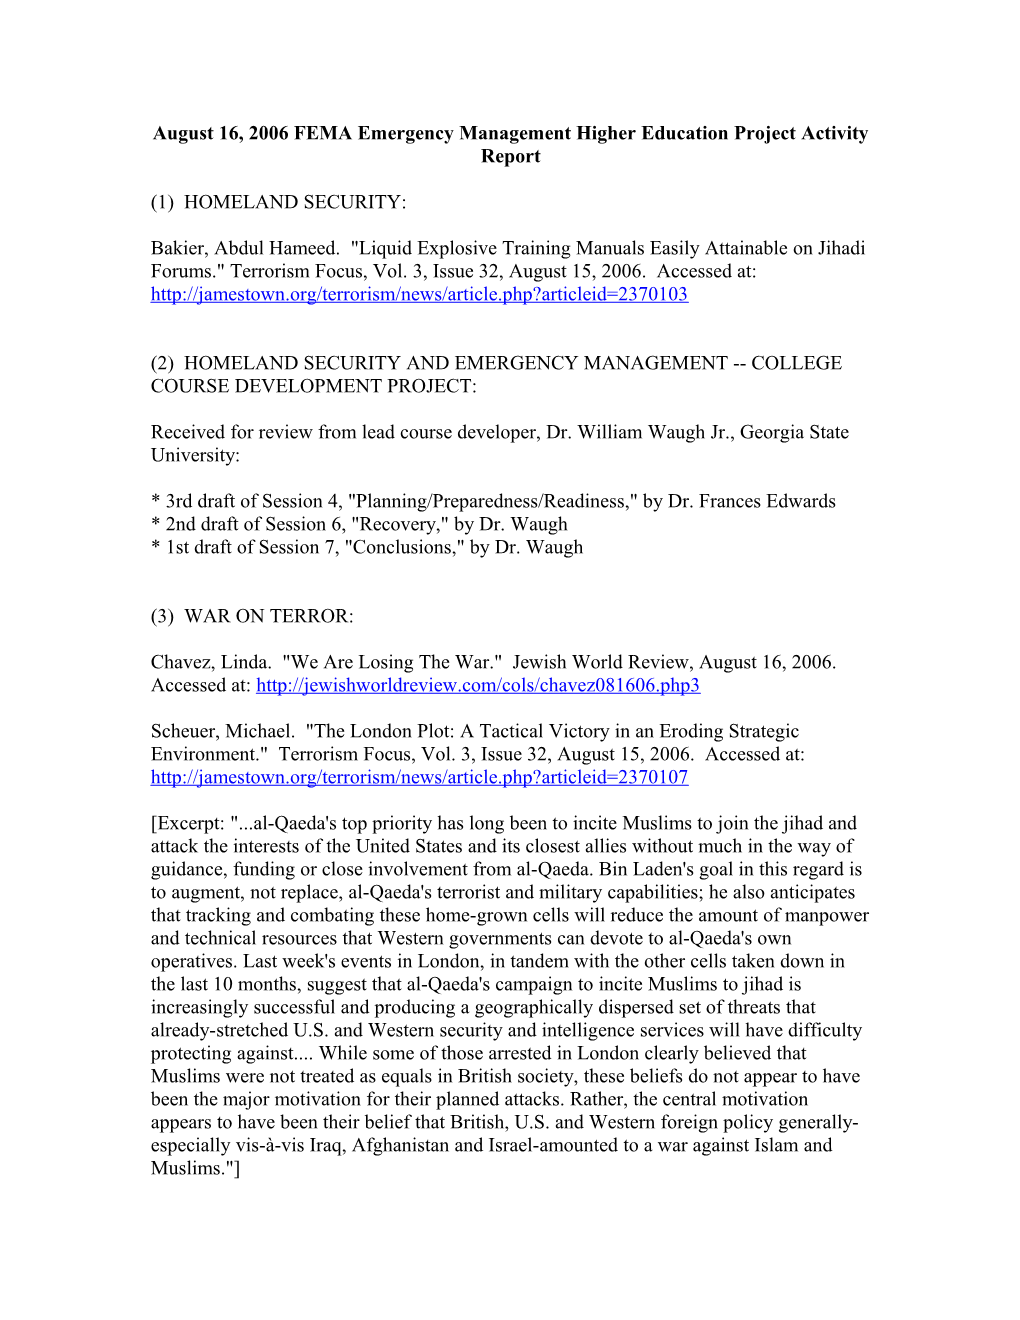 August 16, 2006 FEMA Emergency Management Higher Education Project Activity Report